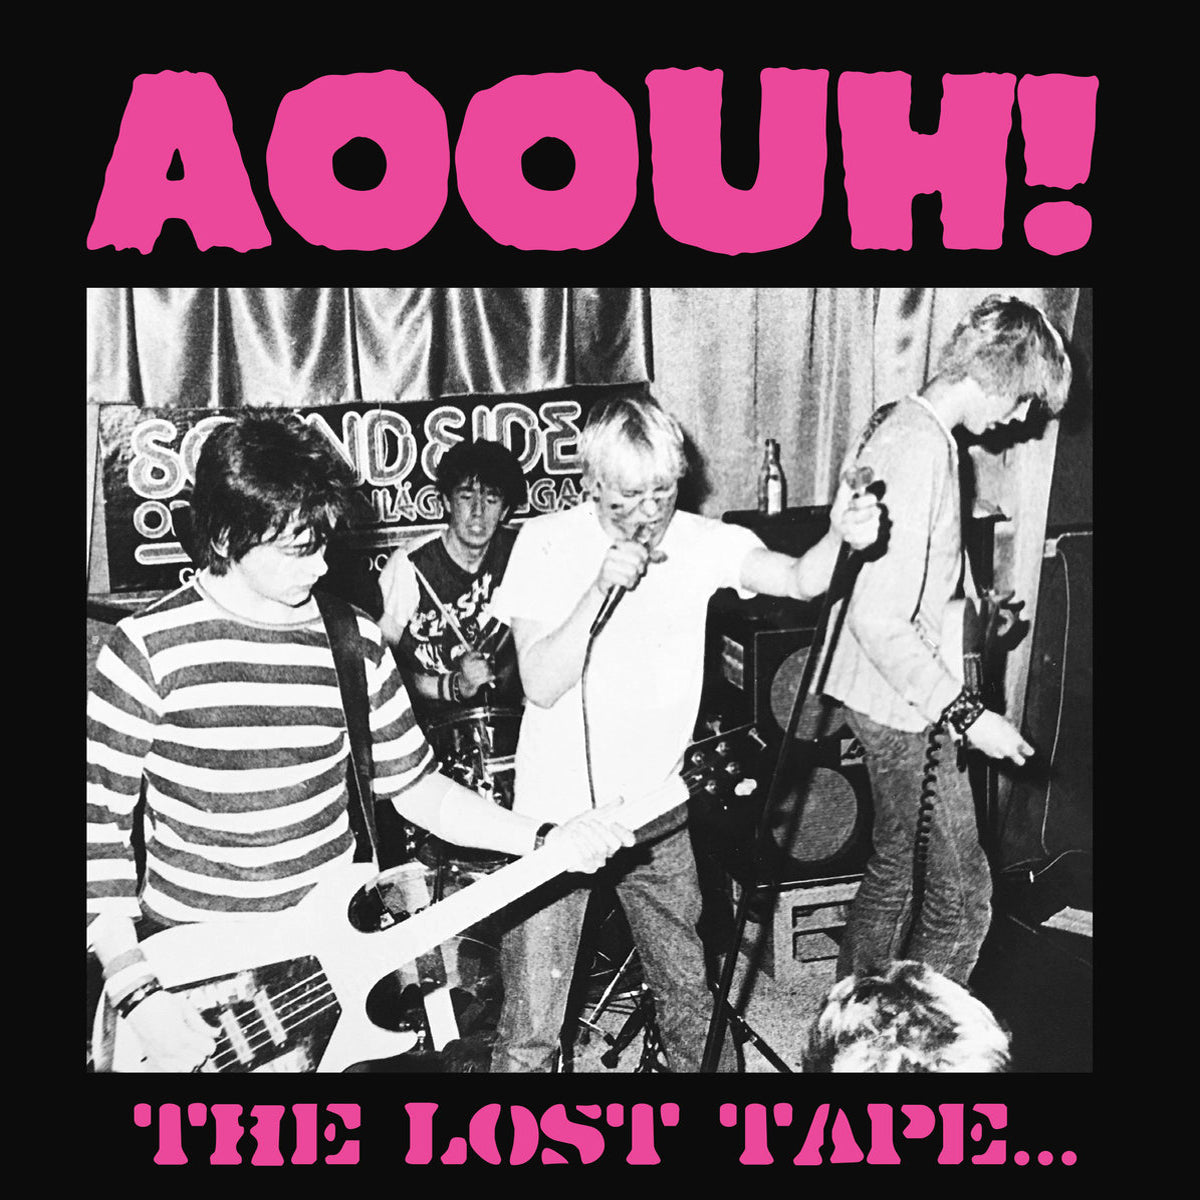 Aoouh!- The Lost Tape 7" ~GHOST HIGHWAY RECORDINGS!